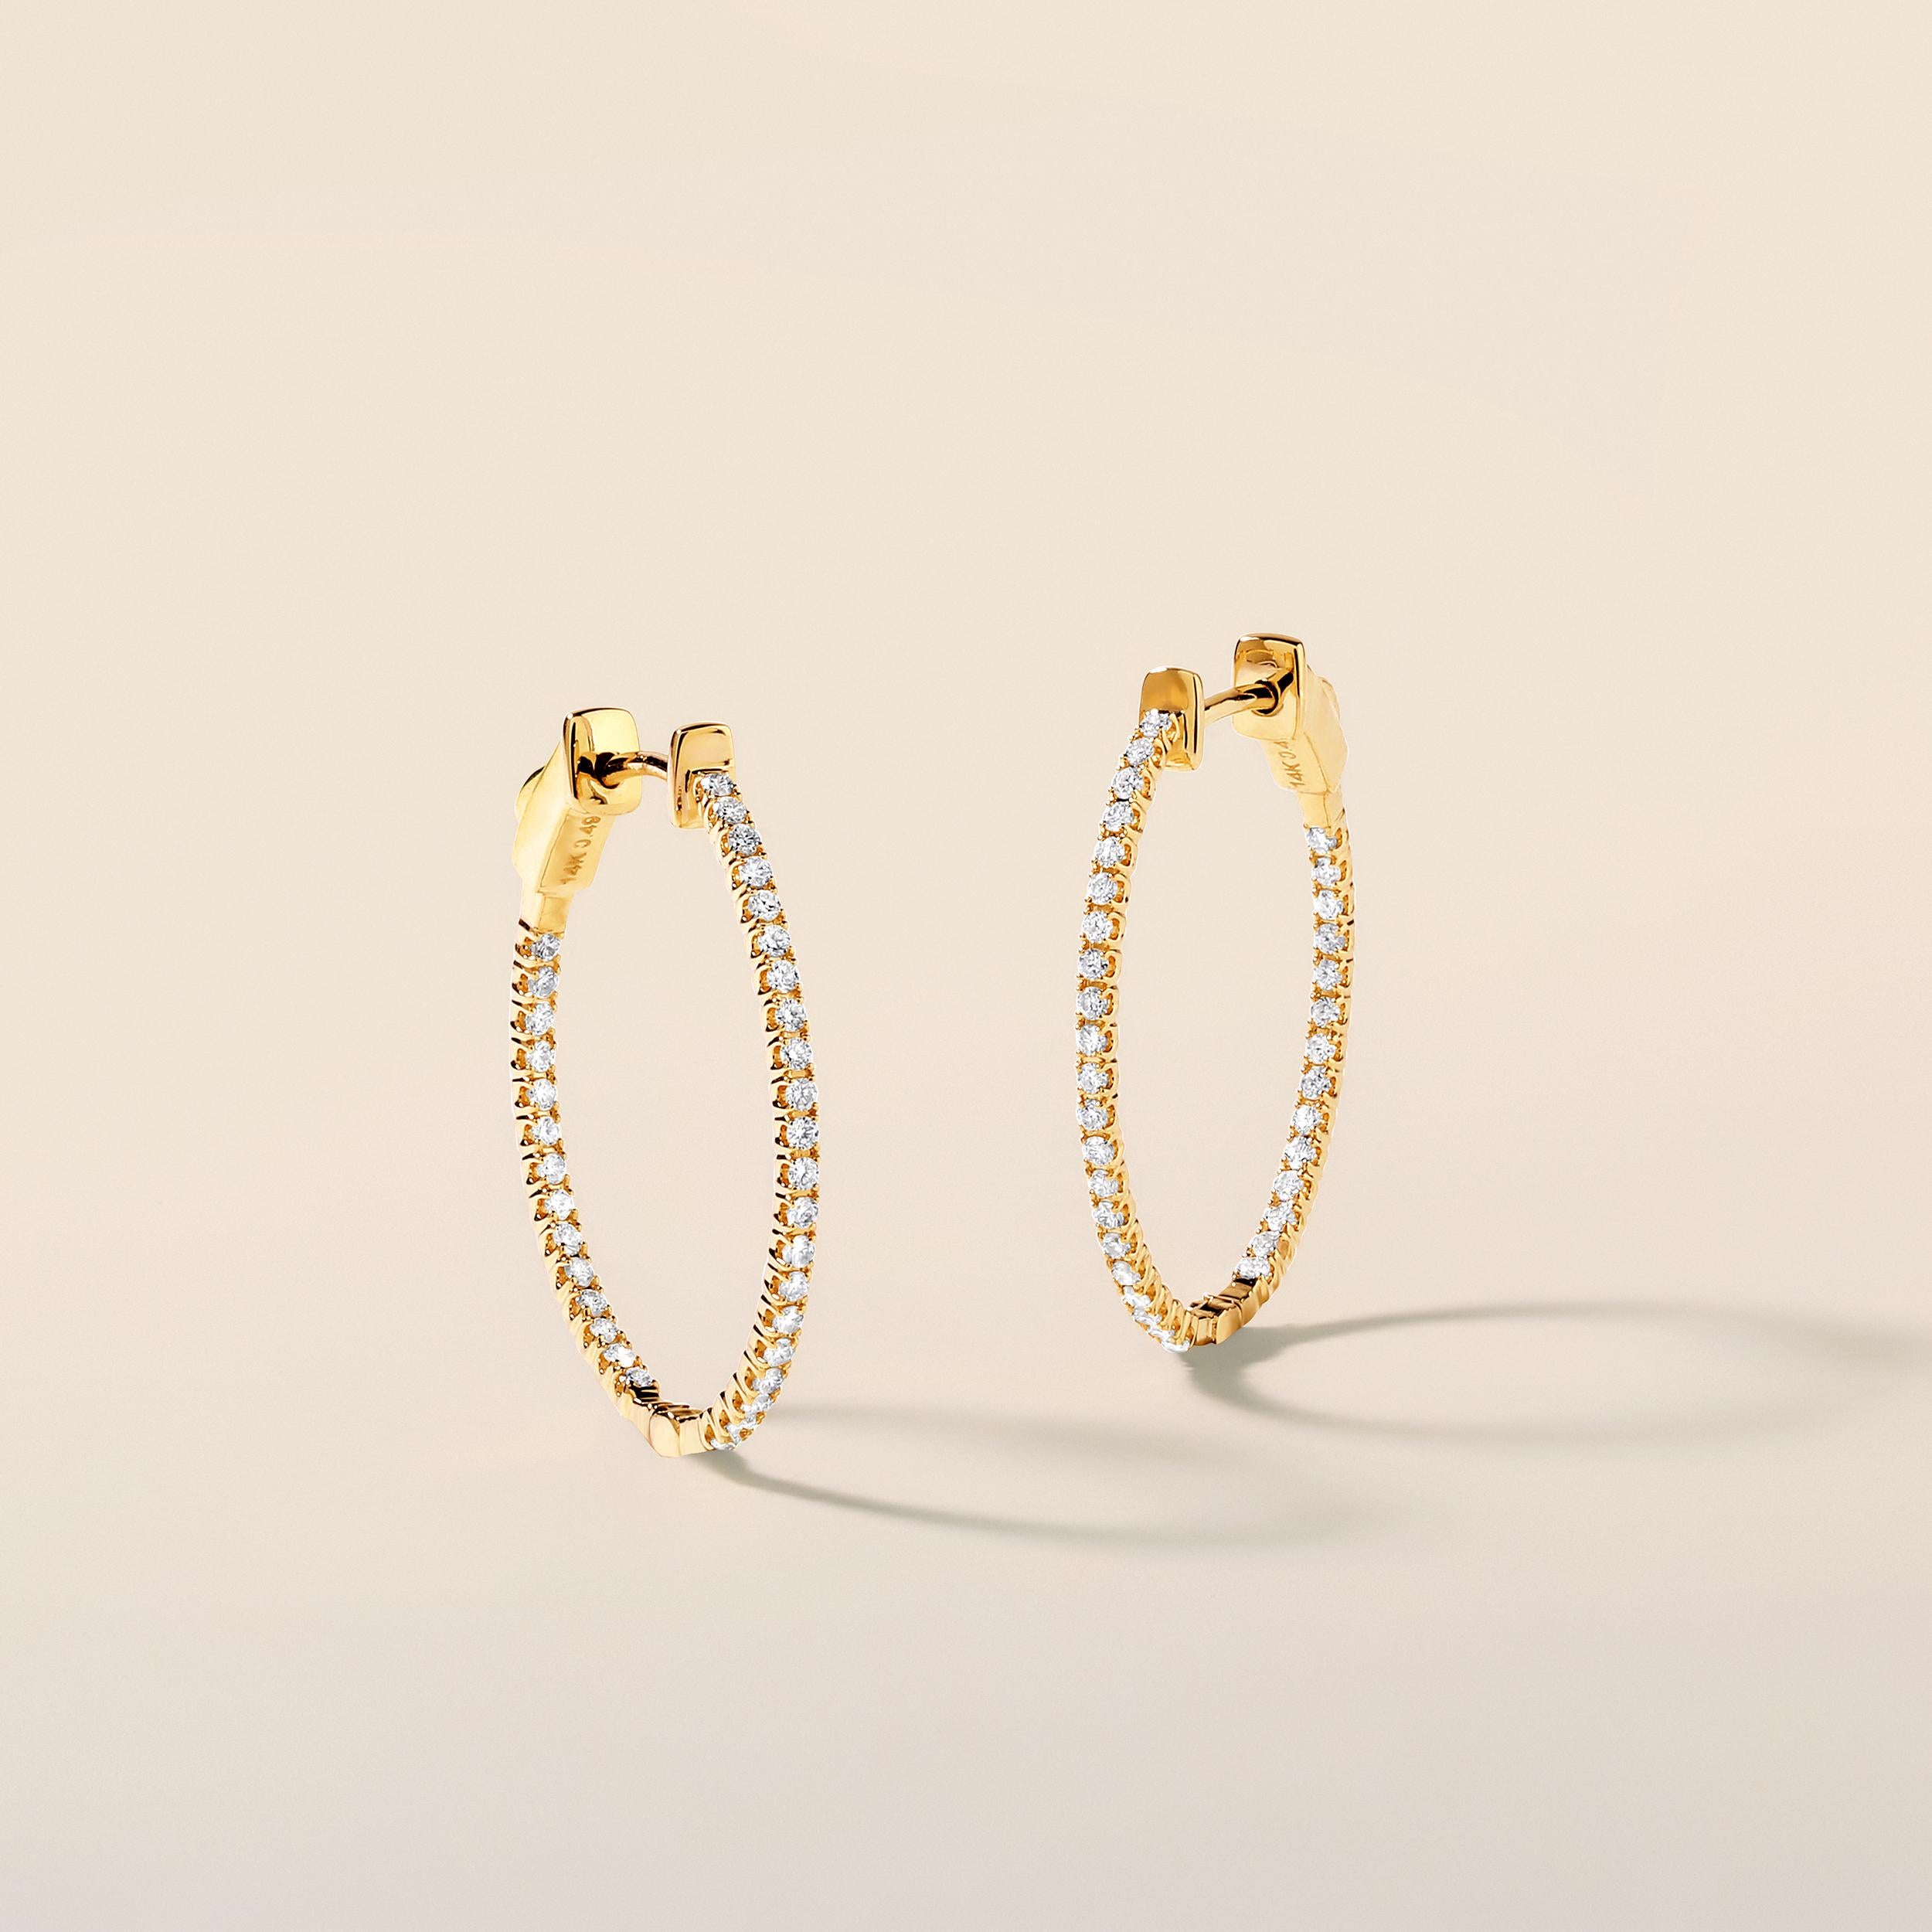 Crafted in 3.1 grams of 14K Yellow Gold, the earrings contains 70 stones of Round Diamonds with a total of 0.49 carat in F-G color and SI clarity.

CONTEMPORARY AND TIMELESS ESSENCE: Crafted in 14-karat/18-karat with 100% natural diamond and